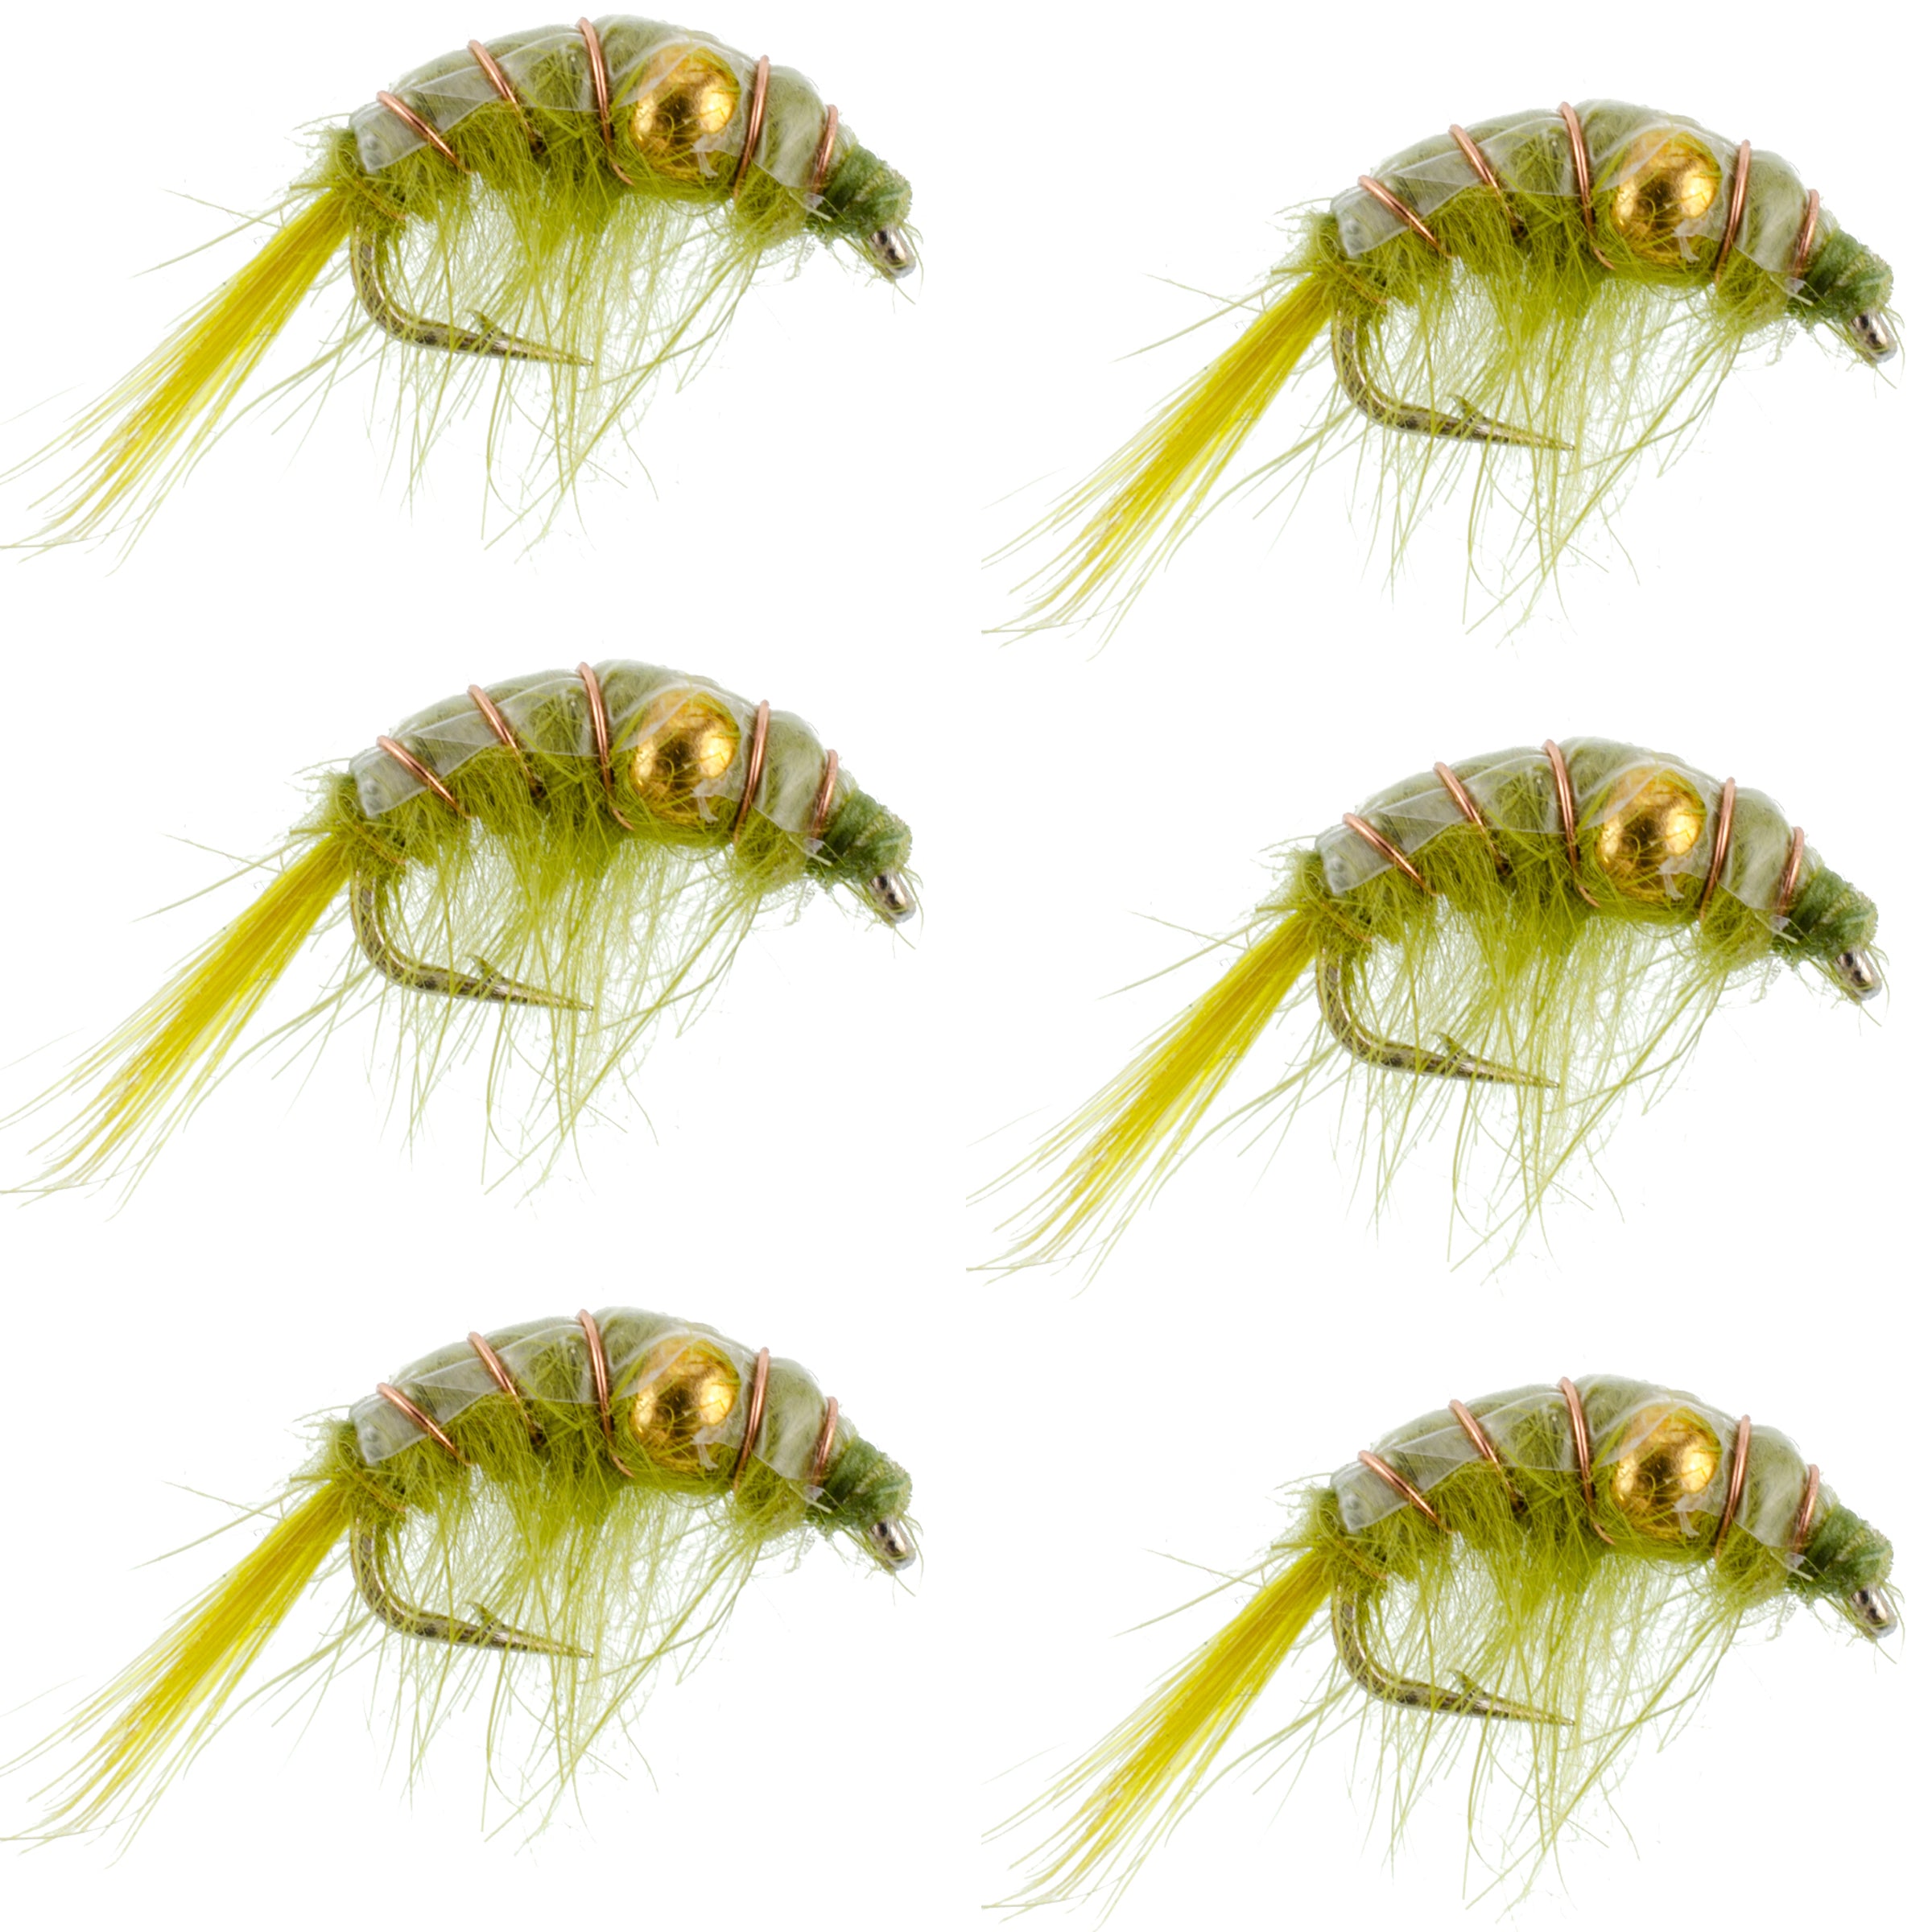 Olive Beaded Shrimp Scud Pattern - 6 Flies - Size 12 - Tailwater Lake Fly Fishing Nymph Flies